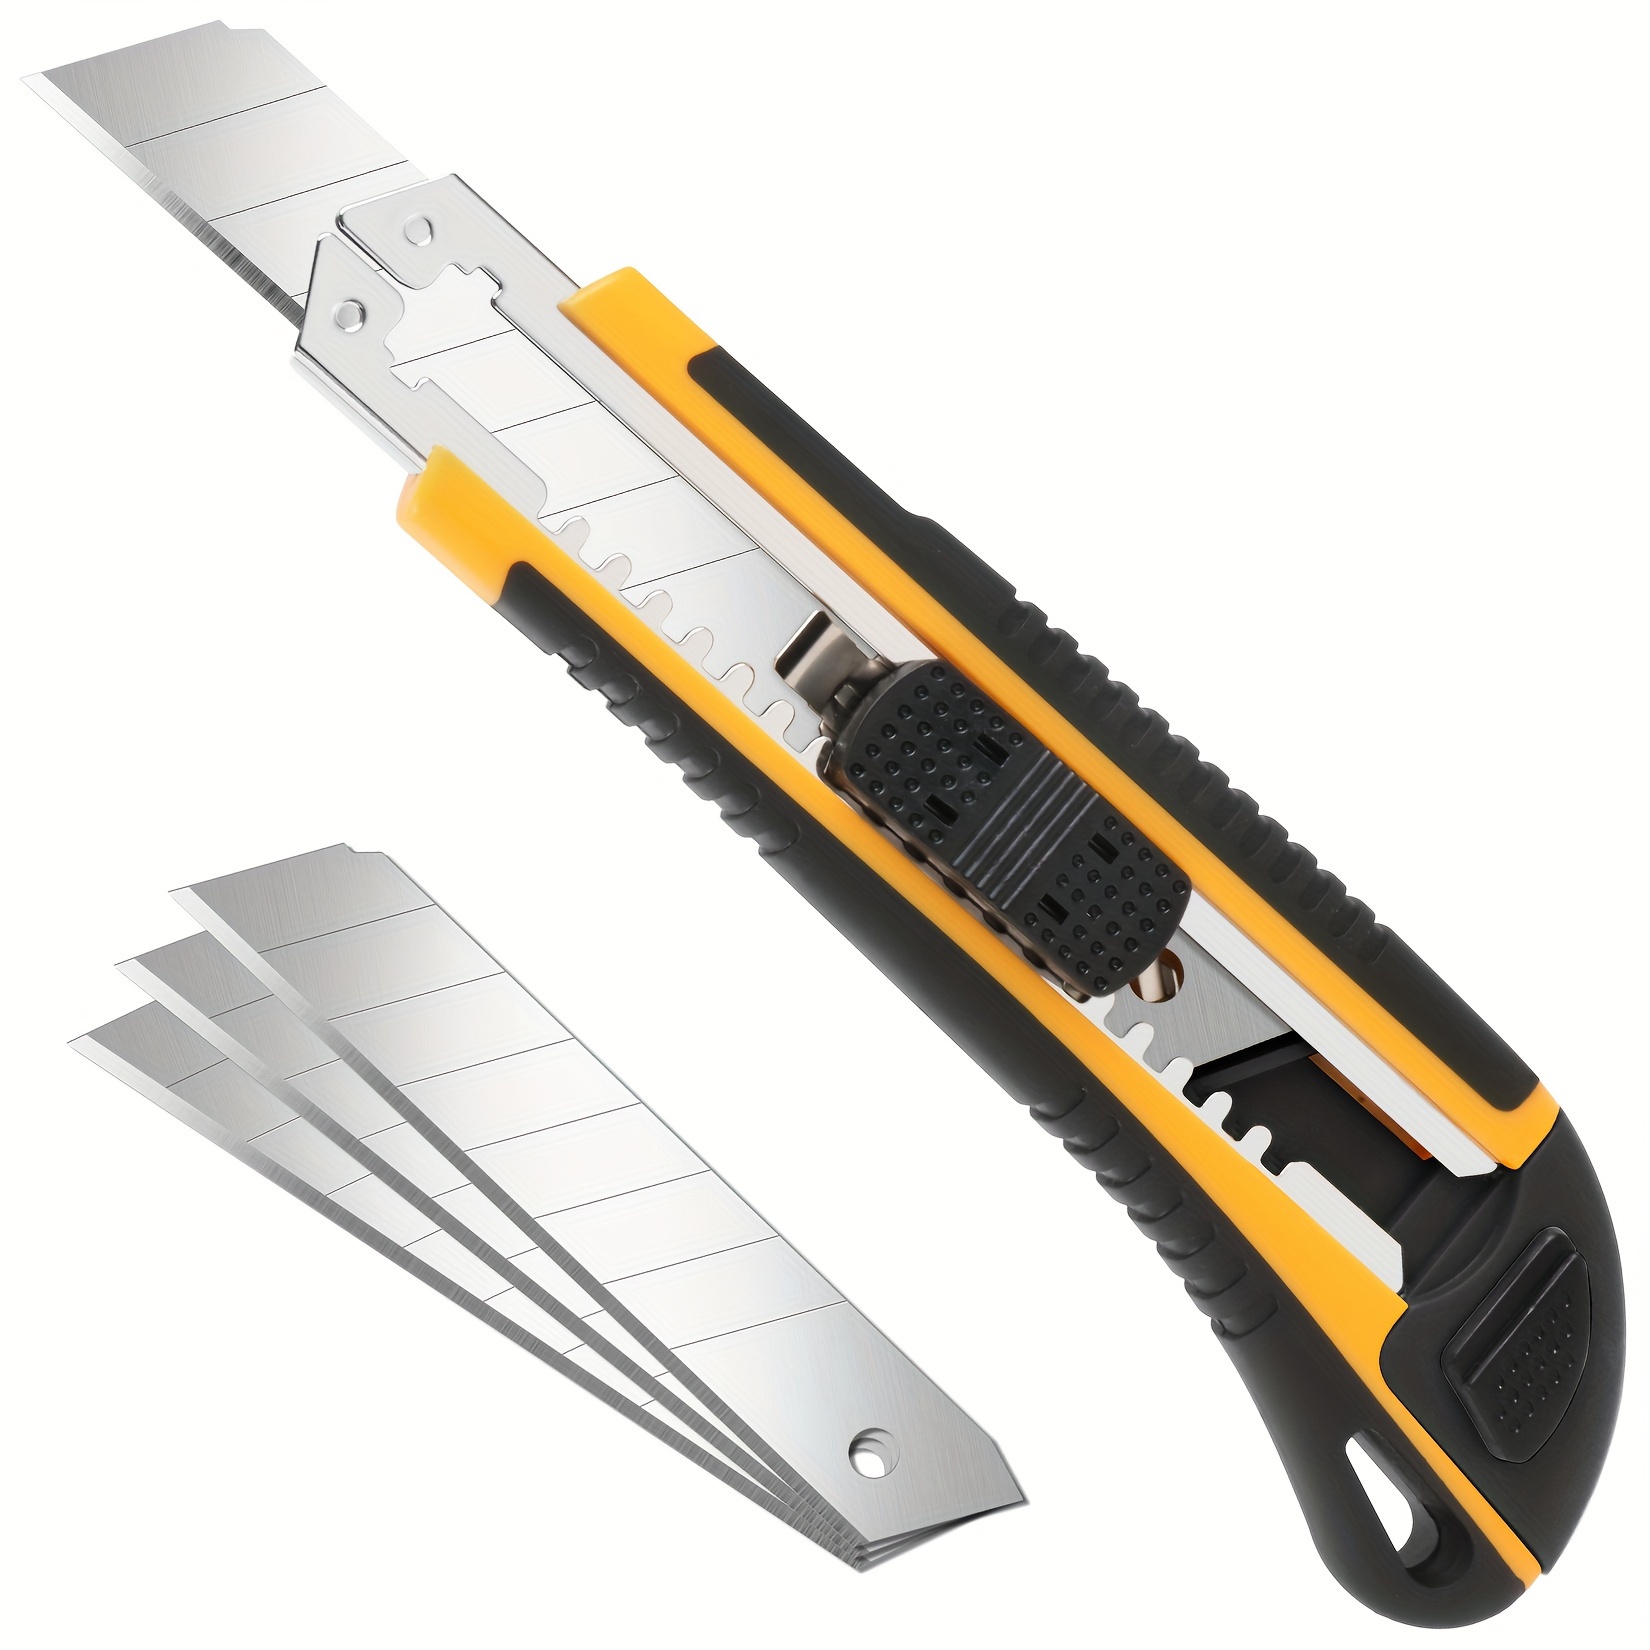 1pc Alloy Steel Utility Knife, Box Opener, Metal Blade Large Box Cutter,  Paper Cutter, Wallpaper Knife, Tool Knife